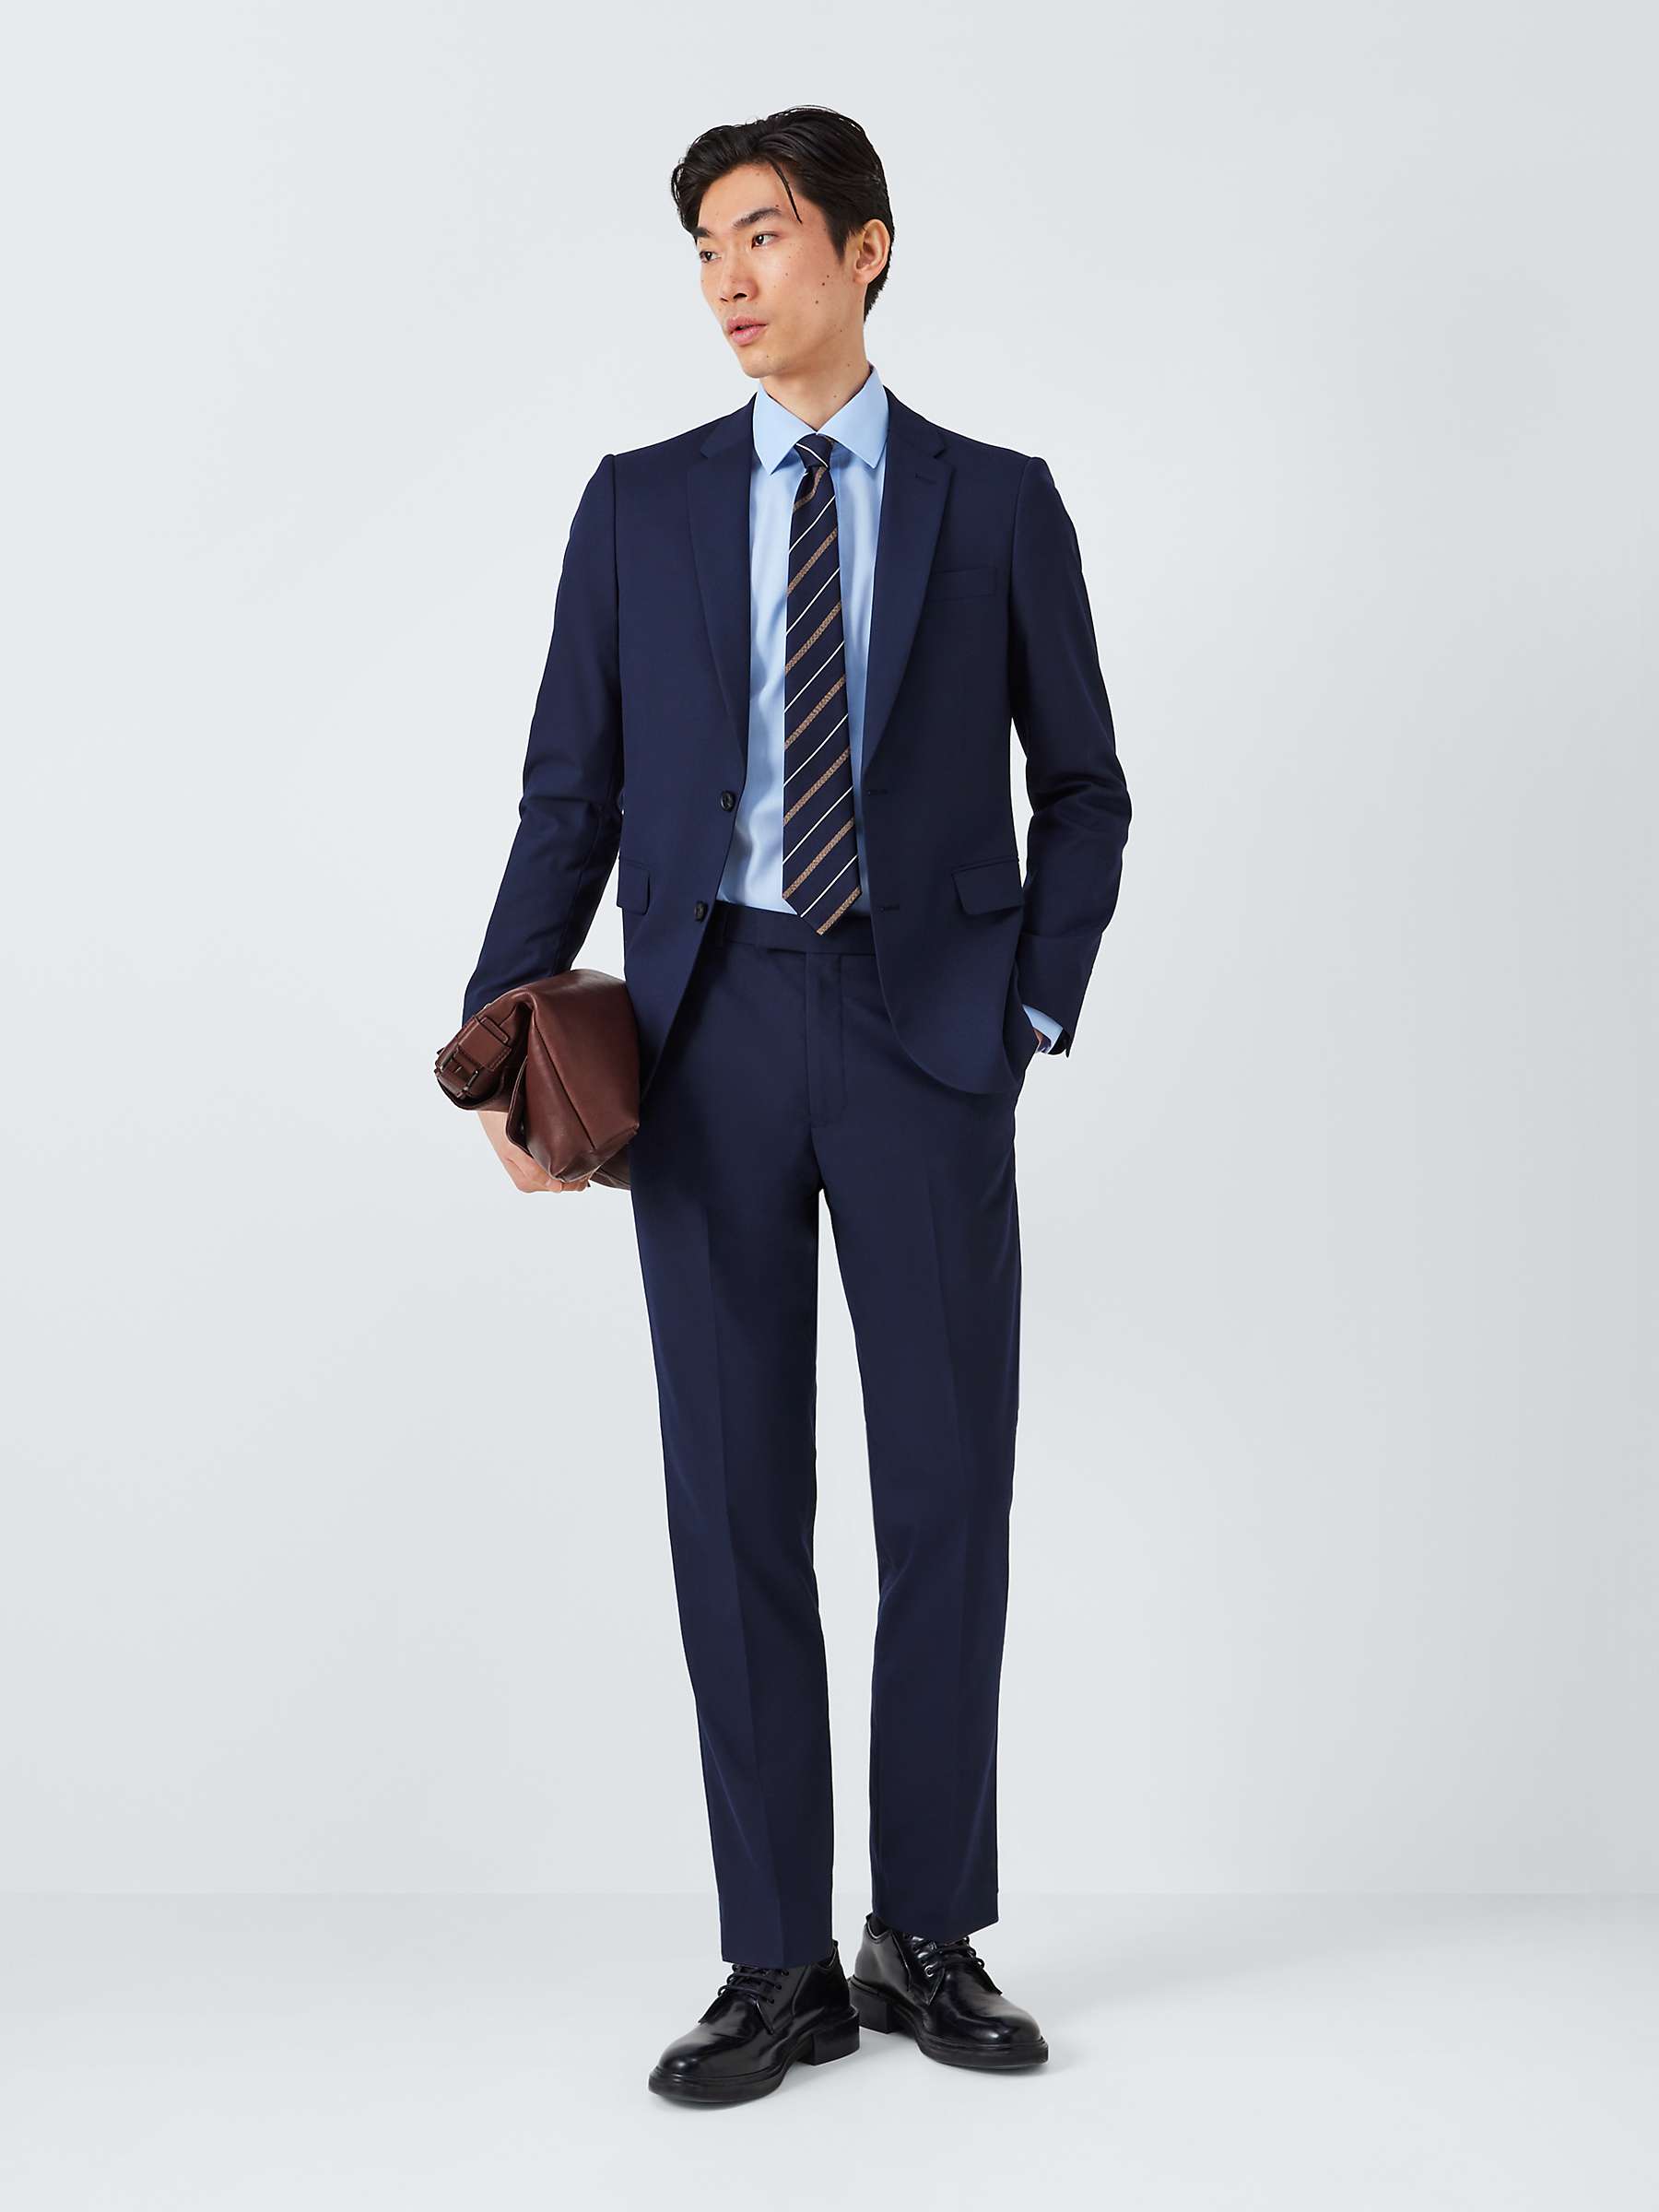 Buy John Lewis Non Iron Twill Tailored Fit Shirt Online at johnlewis.com